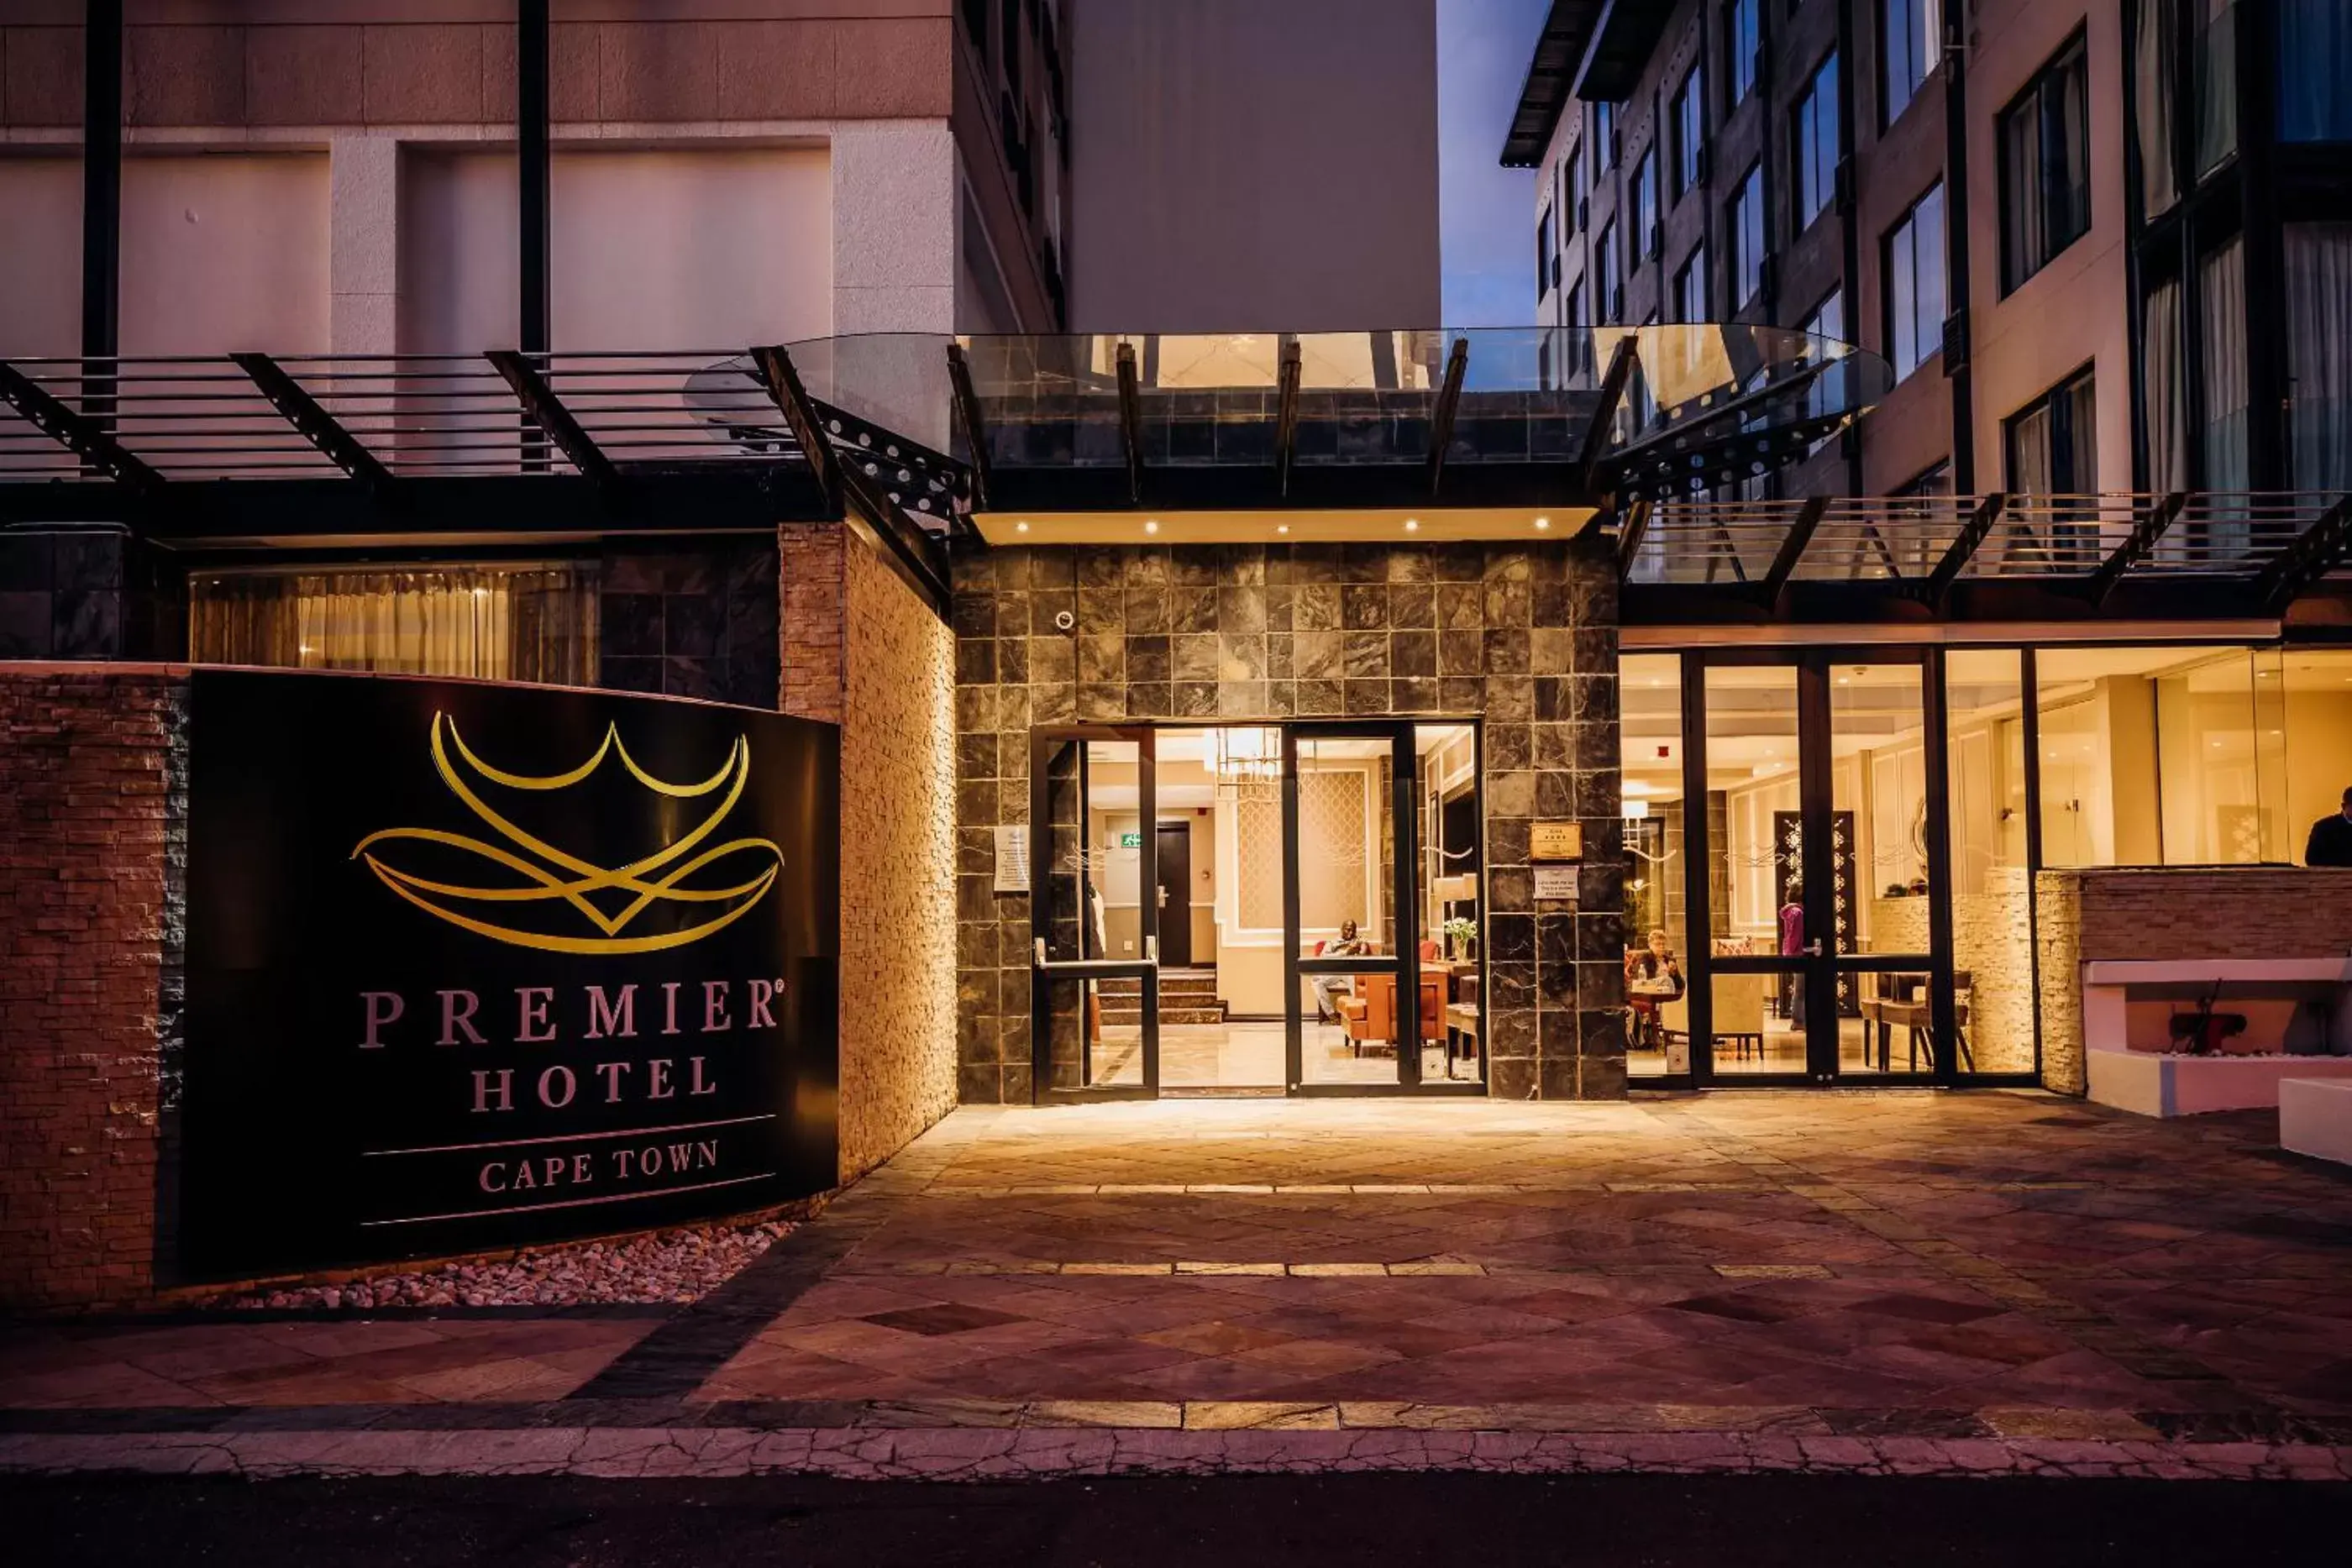 Property Building in Premier Hotel Cape Town